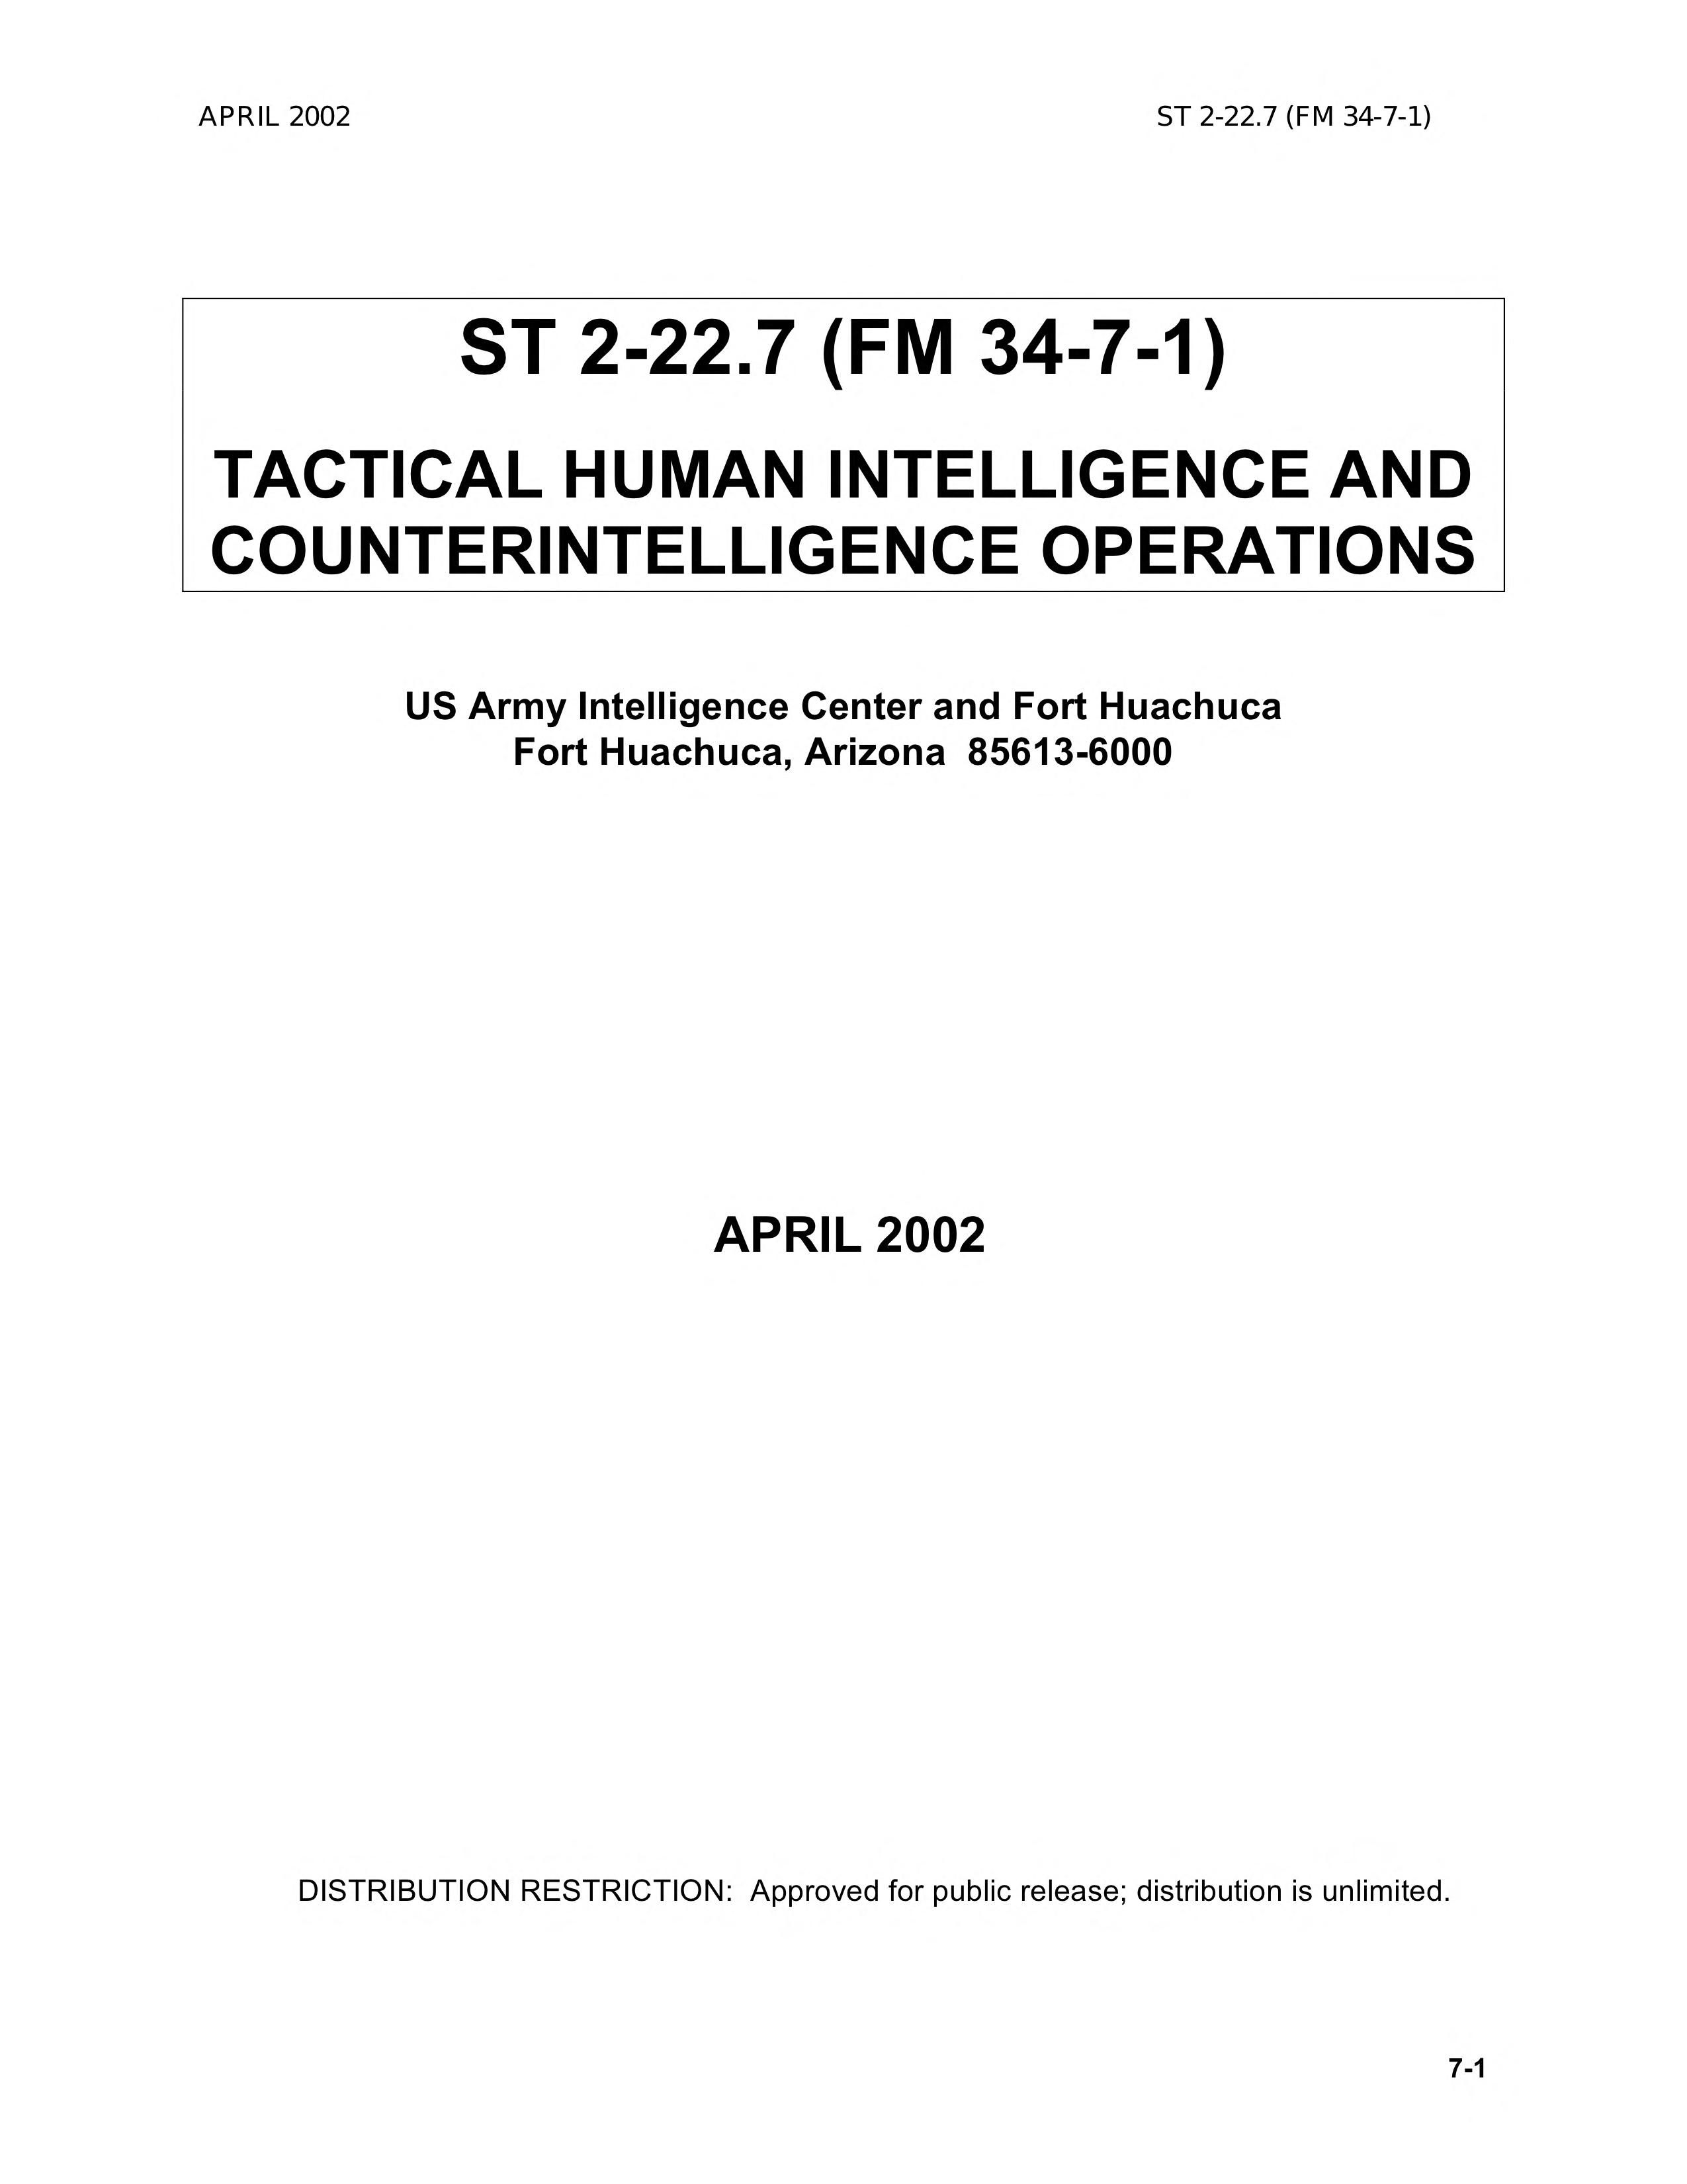 St Tactical Human Intelligence And Counterintelligence